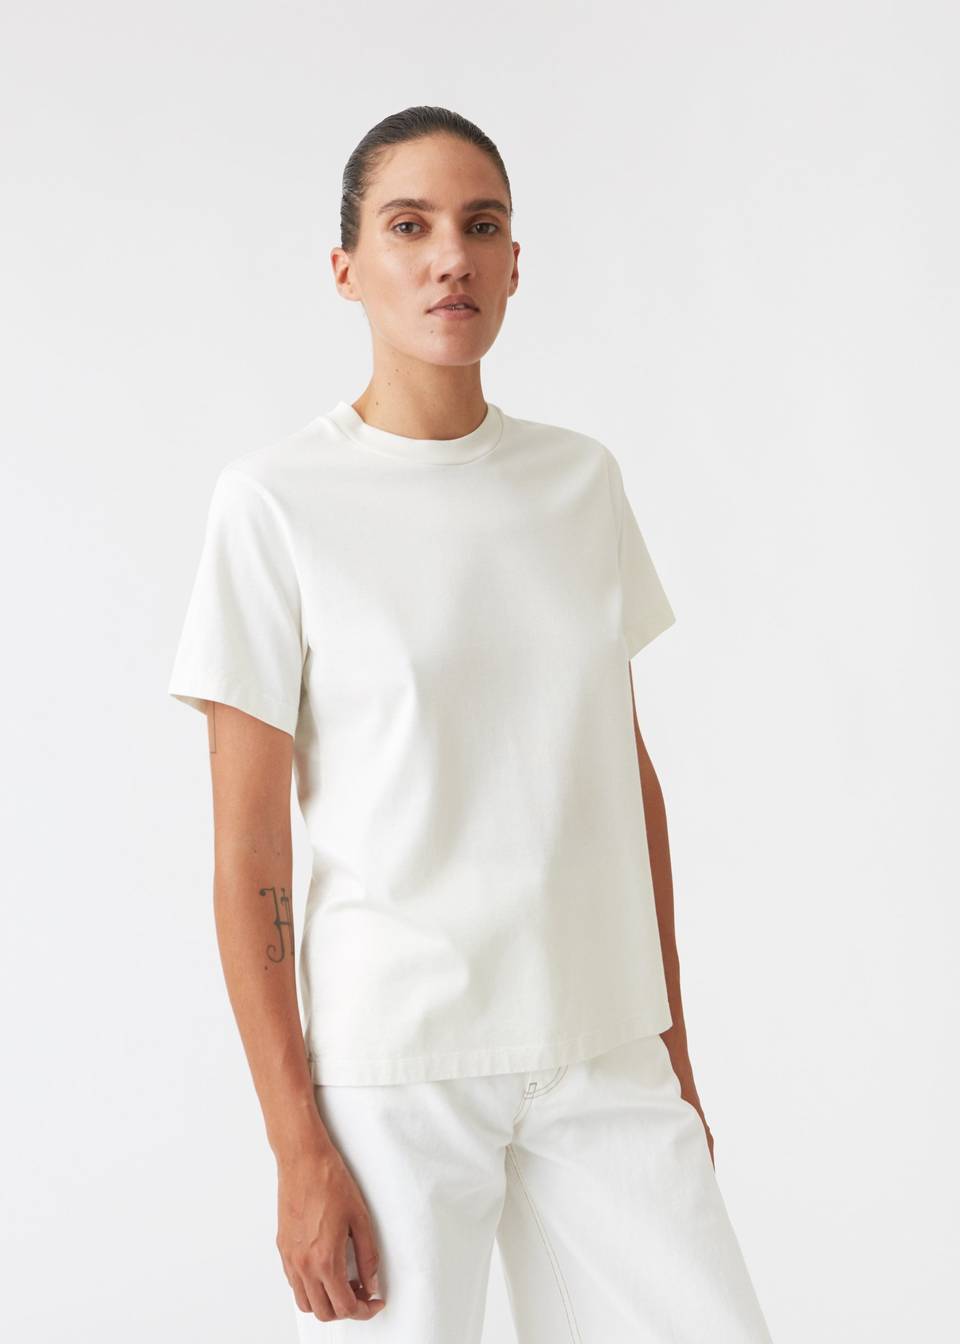 STANDARD TEE IN OFF WHITE BY HOPE